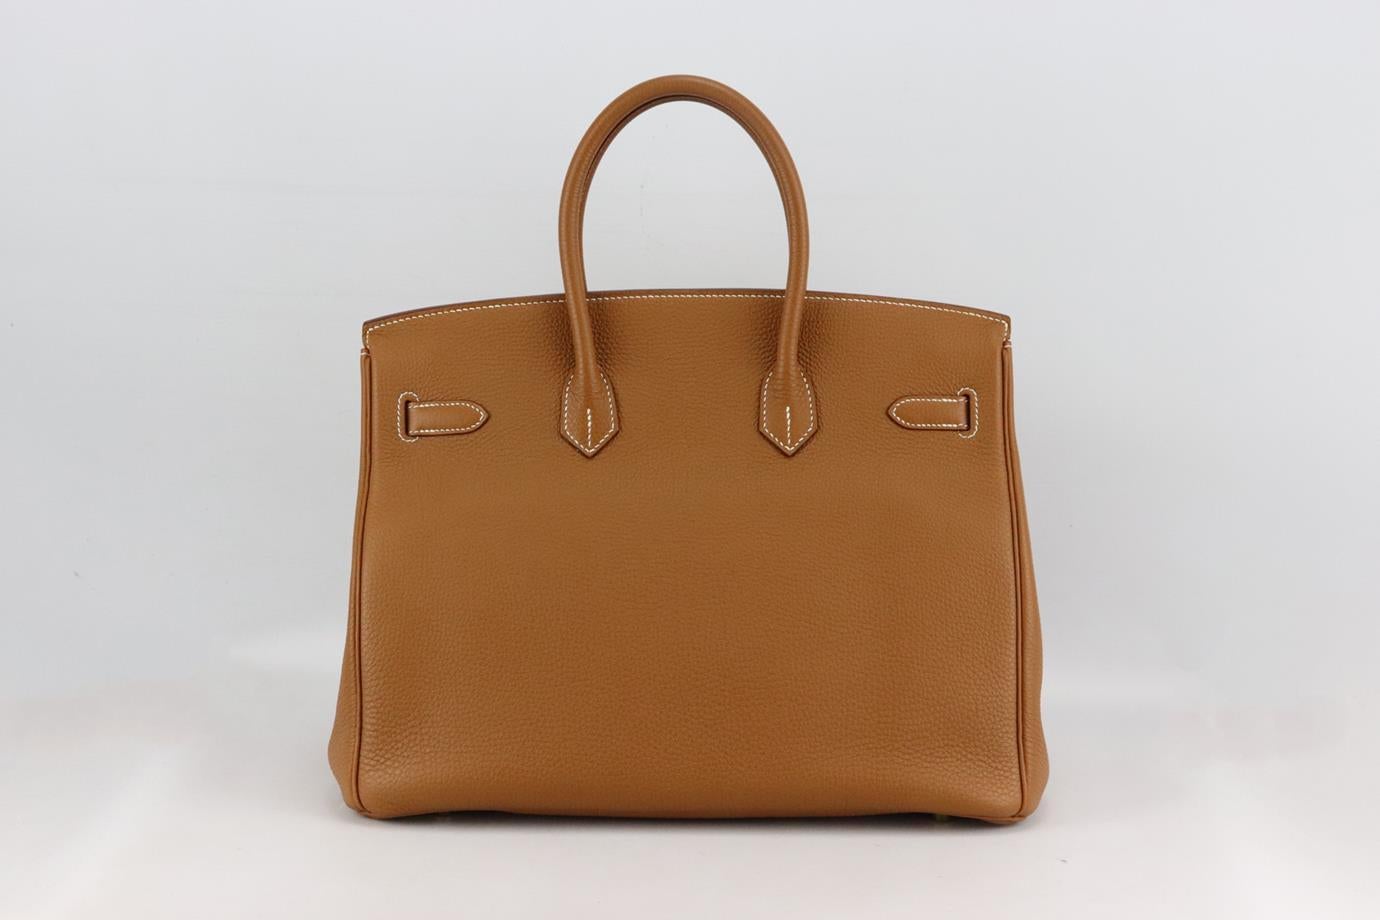 Hermès 2011 Birkin 35cm Togo Leather Bag In Excellent Condition For Sale In London, GB